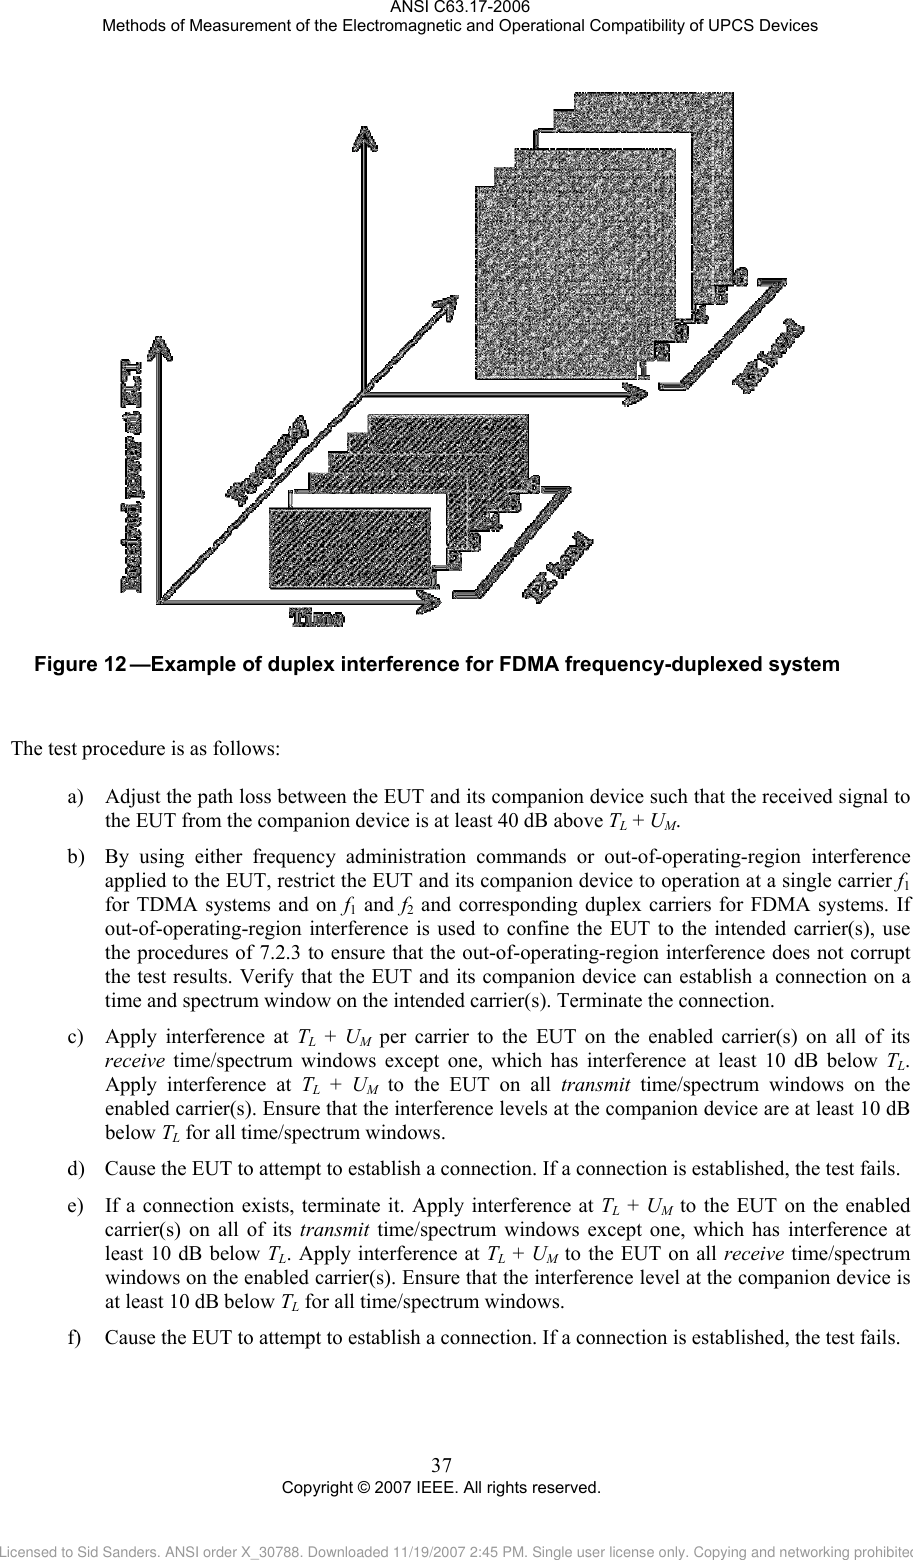 ANSI C63.17-2006 Methods of Measurement of the Electromagnetic and Operational Compatibility of UPCS Devices  Figure 12 —Example of duplex interference for FDMA frequency-duplexed system   The test procedure is as follows:  a) Adjust the path loss between the EUT and its companion device such that the received signal to the EUT from the companion device is at least 40 dB above TL + UM. b) By using either frequency administration commands or out-of-operating-region interference applied to the EUT, restrict the EUT and its companion device to operation at a single carrier f1 for TDMA systems and on f1 and f2 and corresponding duplex carriers for FDMA systems. If out-of-operating-region interference is used to confine the EUT to the intended carrier(s), use the procedures of 7.2.3 to ensure that the out-of-operating-region interference does not corrupt the test results. Verify that the EUT and its companion device can establish a connection on a time and spectrum window on the intended carrier(s). Terminate the connection. c) Apply interference at TL + UM per carrier to the EUT on the enabled carrier(s) on all of its receive time/spectrum windows except one, which has interference at least 10 dB below TL. Apply interference at TL + UM to the EUT on all transmit time/spectrum windows on the enabled carrier(s). Ensure that the interference levels at the companion device are at least 10 dB below TL for all time/spectrum windows. d) Cause the EUT to attempt to establish a connection. If a connection is established, the test fails. e) If a connection exists, terminate it. Apply interference at TL + UM to the EUT on the enabled carrier(s) on all of its transmit time/spectrum windows except one, which has interference at least 10 dB below TL. Apply interference at TL + UM to the EUT on all receive time/spectrum windows on the enabled carrier(s). Ensure that the interference level at the companion device is at least 10 dB below TL for all time/spectrum windows. f) Cause the EUT to attempt to establish a connection. If a connection is established, the test fails.  37 Copyright © 2007 IEEE. All rights reserved. Licensed to Sid Sanders. ANSI order X_30788. Downloaded 11/19/2007 2:45 PM. Single user license only. Copying and networking prohibited.